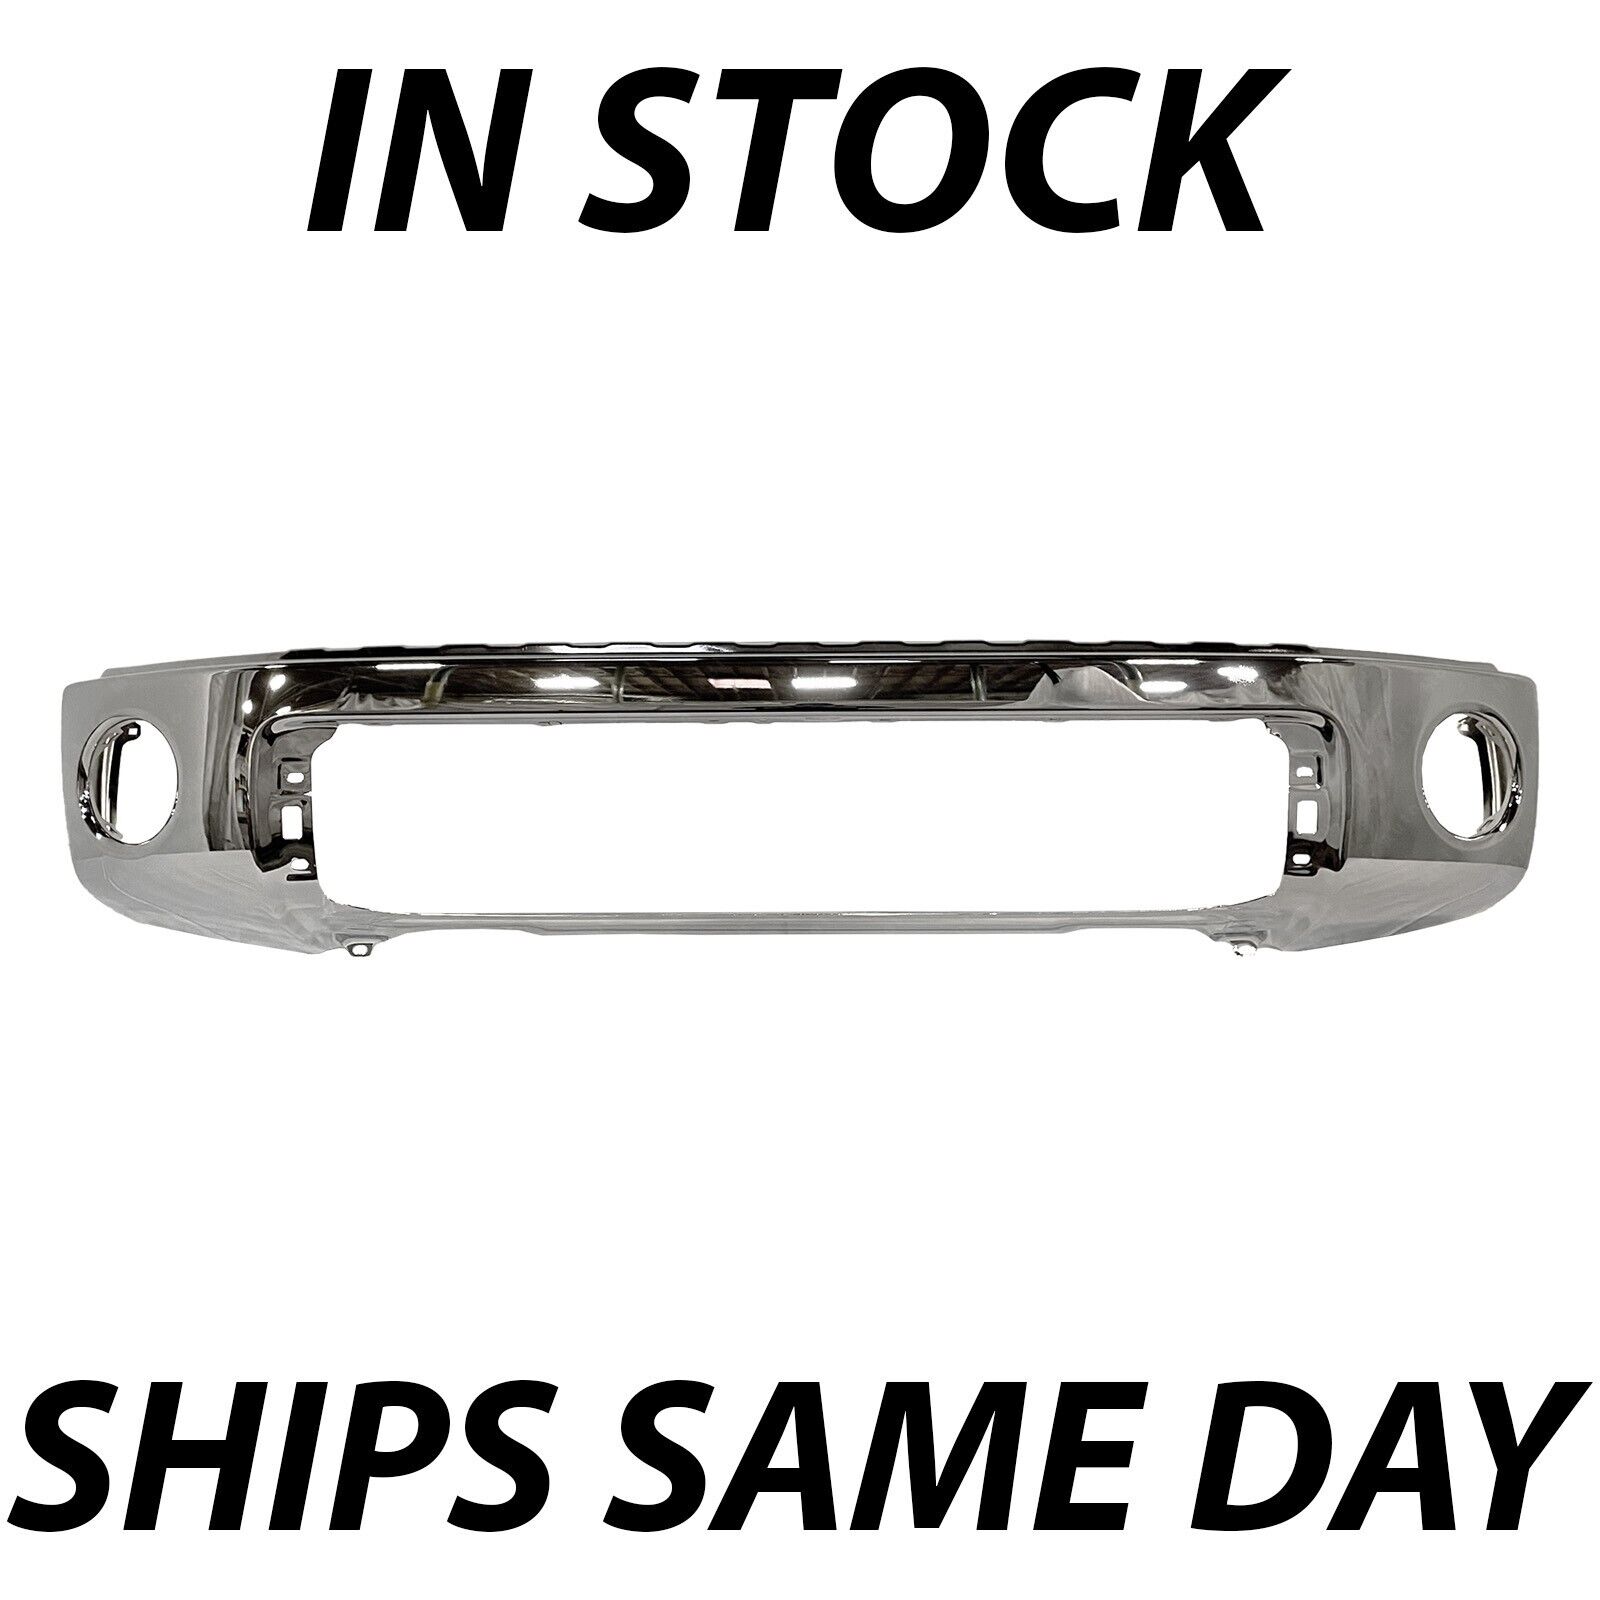 NEW Chrome - Steel Front Bumper Cover for 2007-2013 Toyota Tundra Truck 07-13